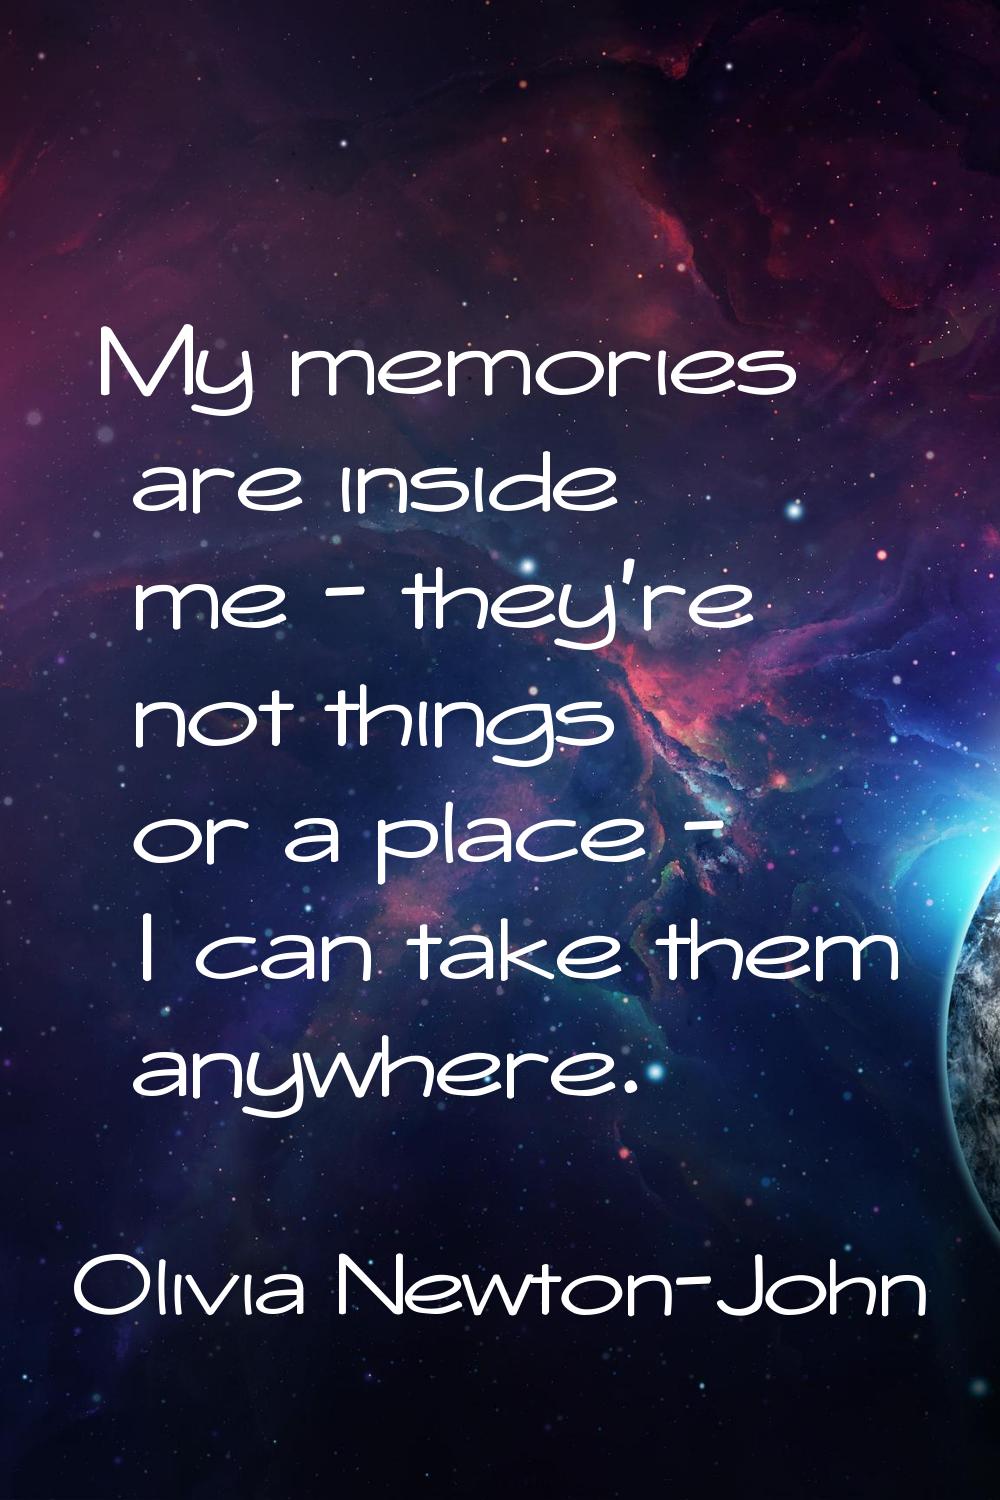 My memories are inside me - they're not things or a place - I can take them anywhere.